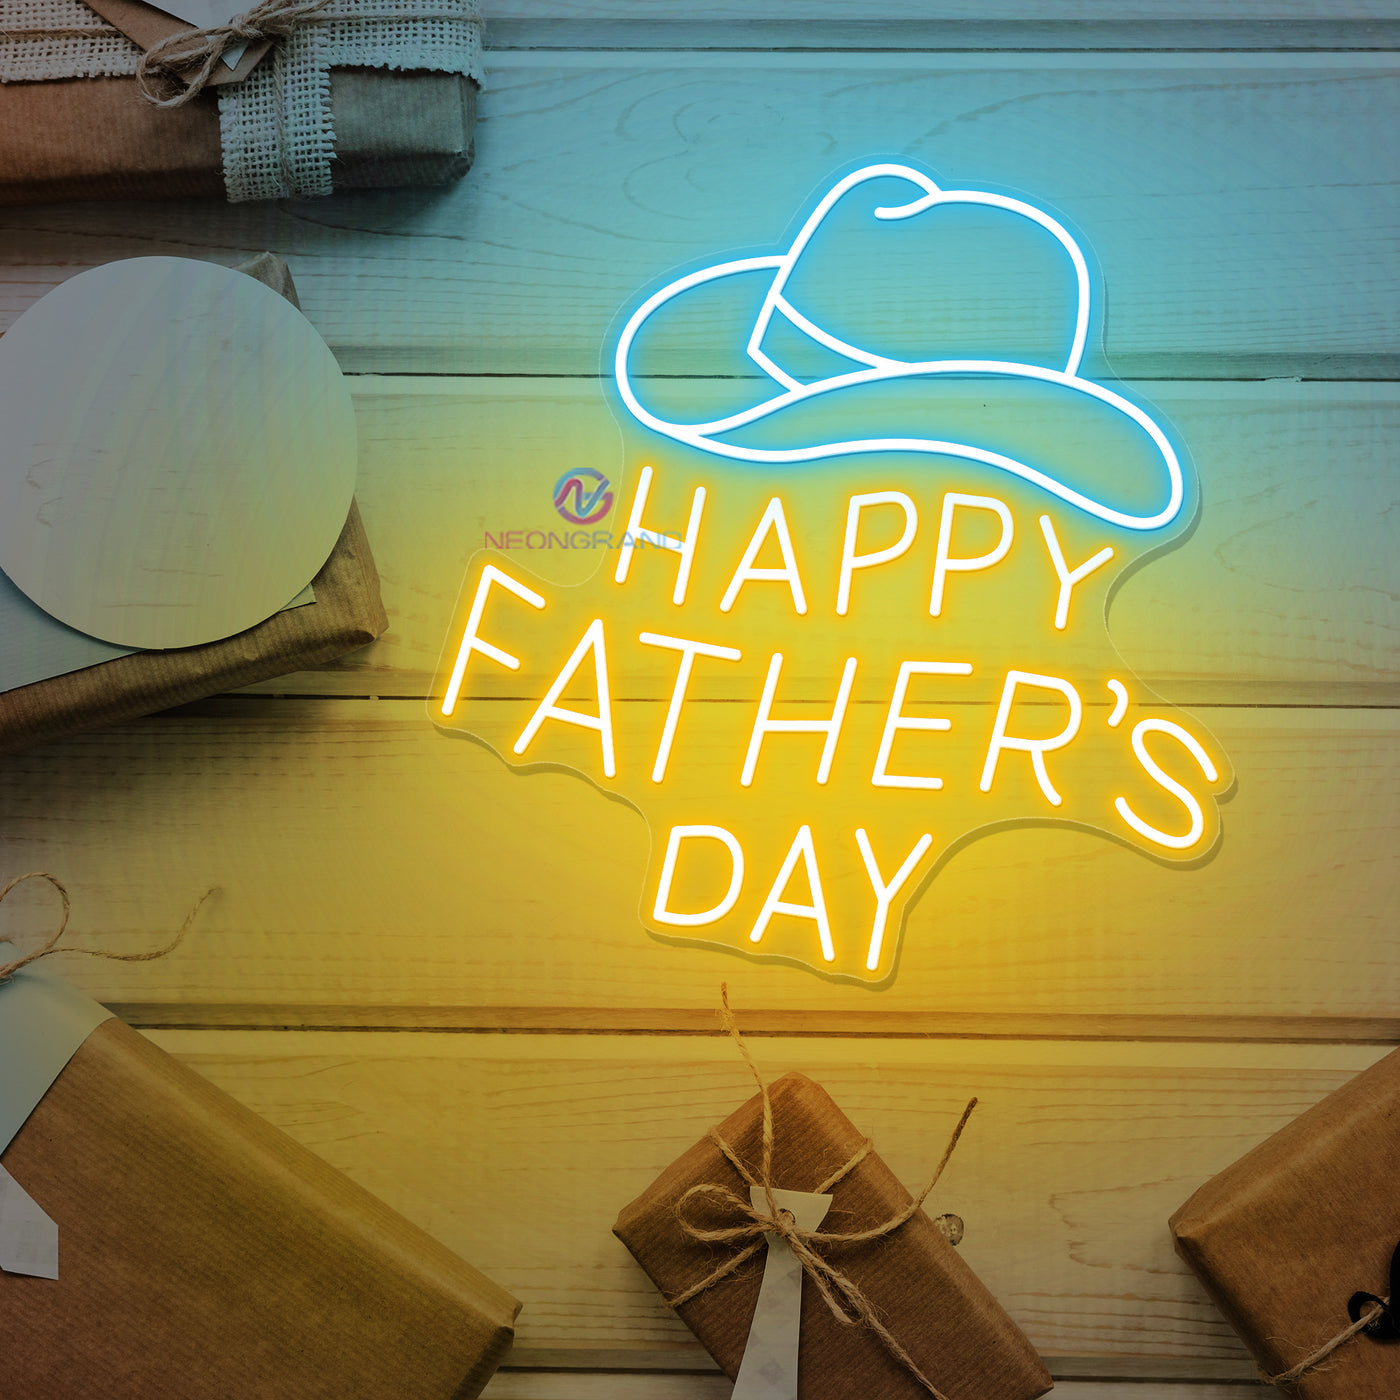 Happy Fathers Day Neon Sign Led Light yellow